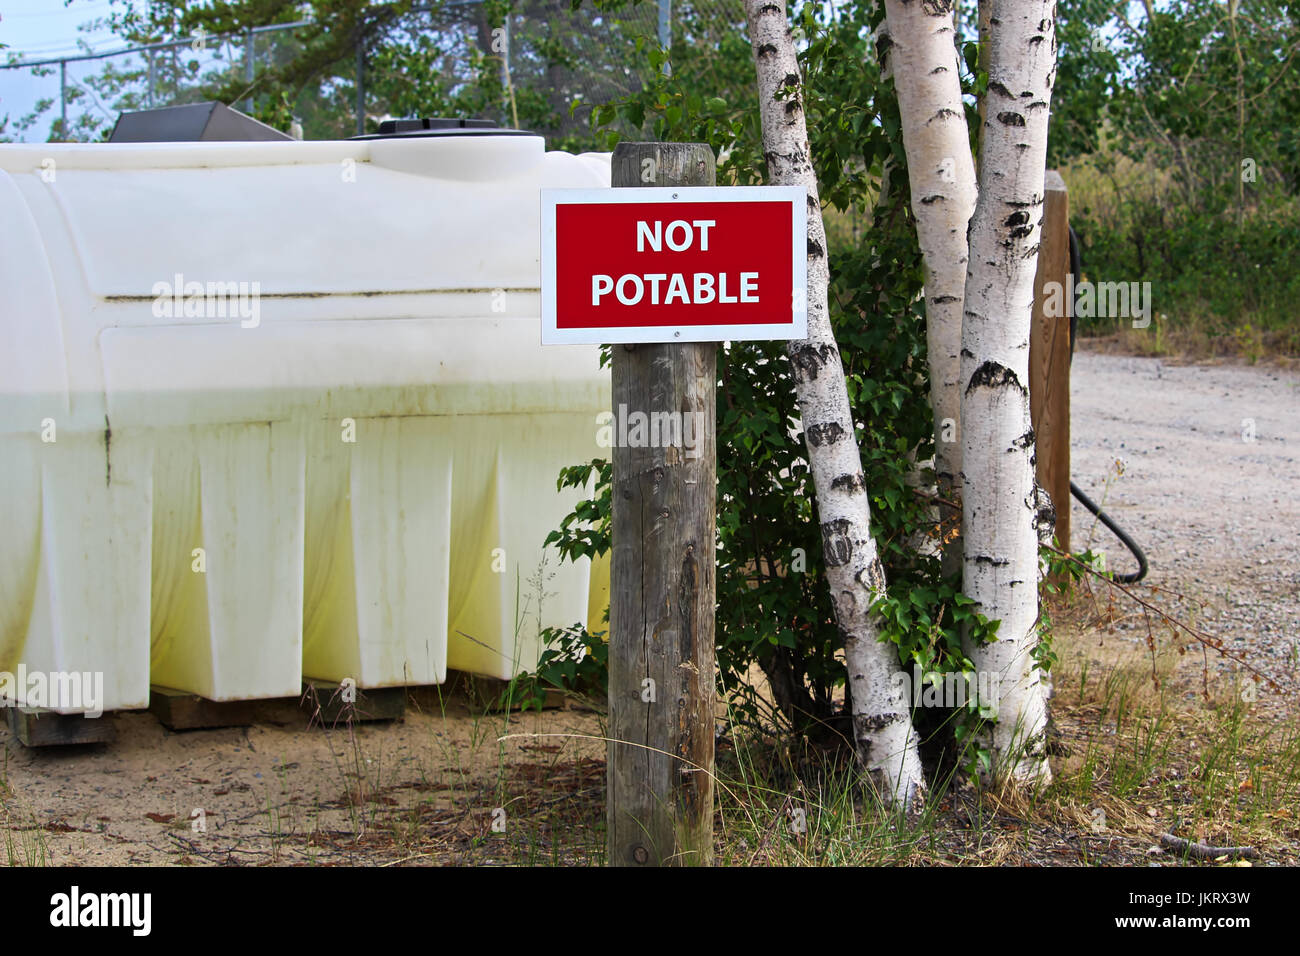 A not potable sign next to a water holding tank. Stock Photo